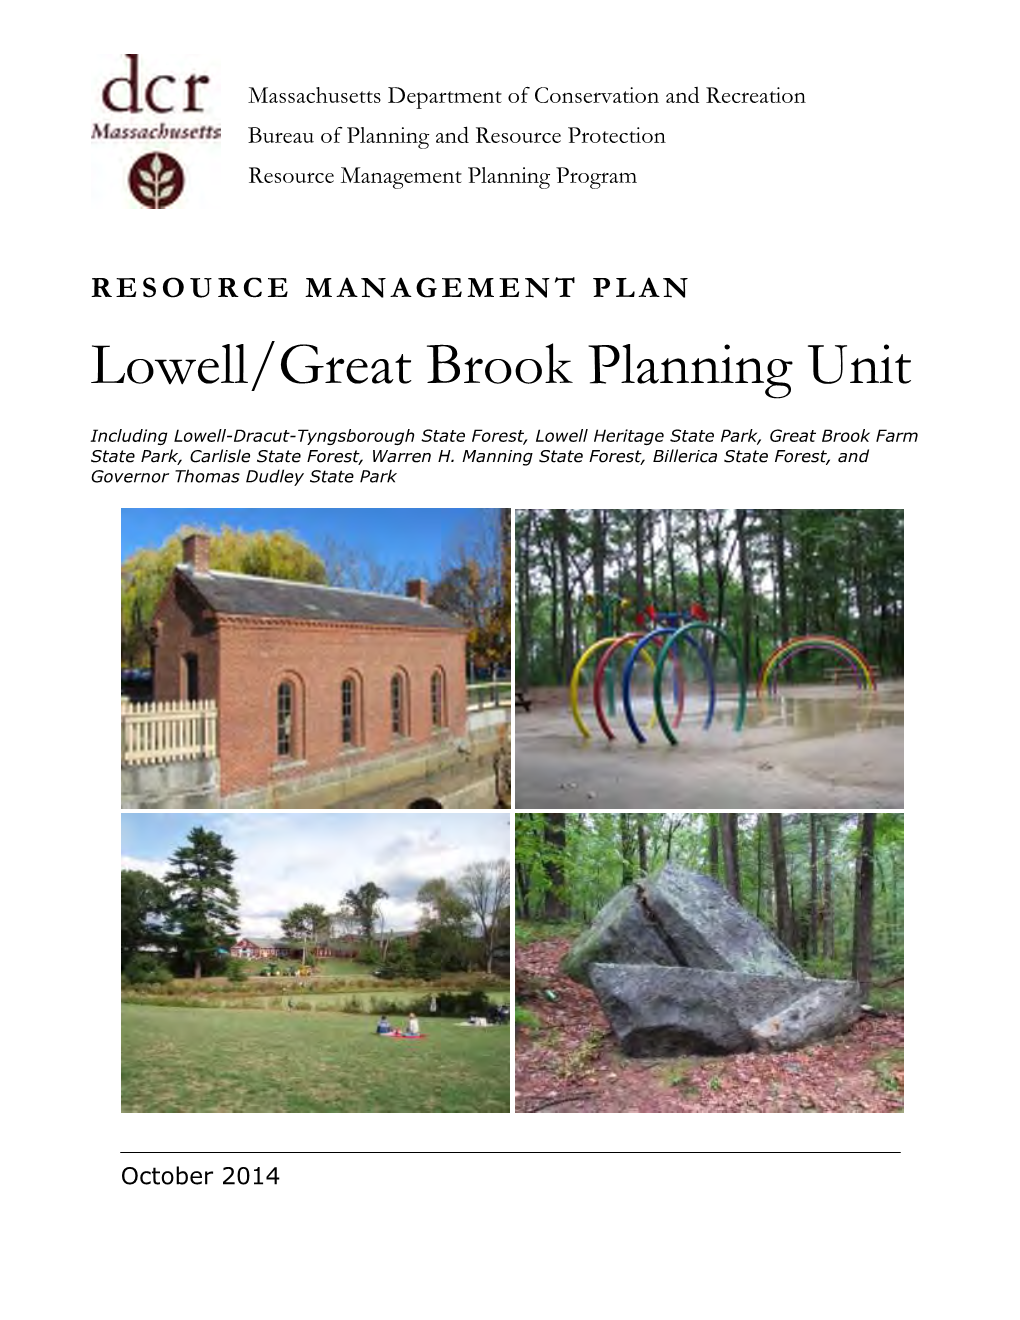 Lowell/Great Brook Planning Unit